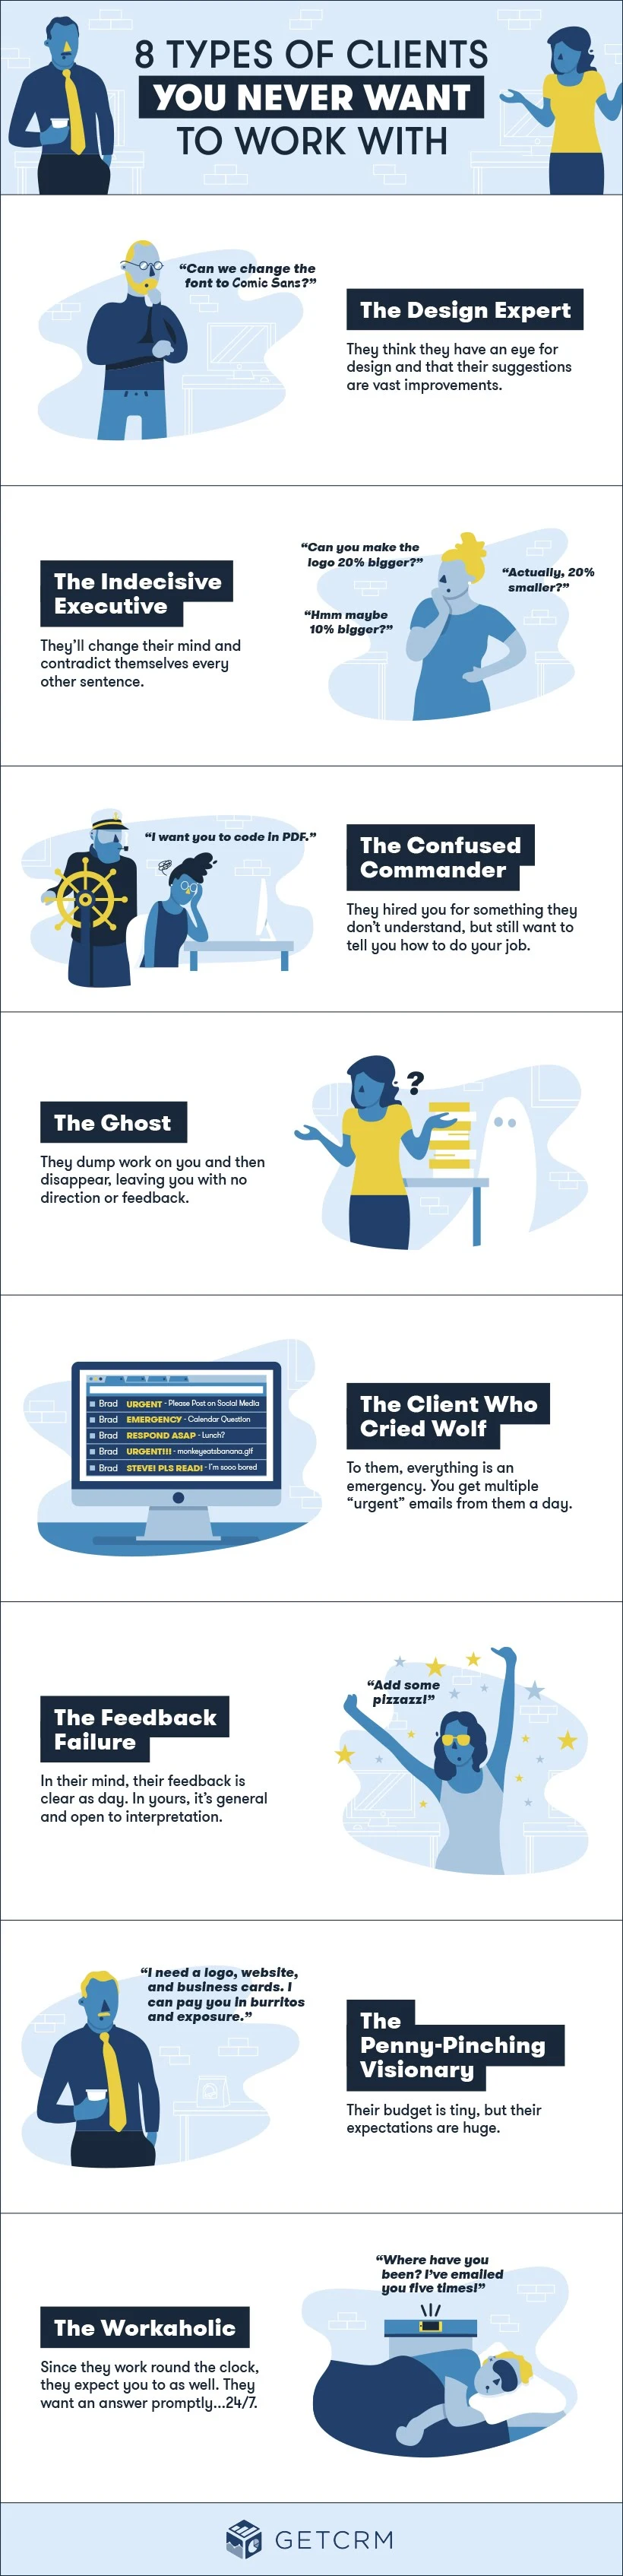 8 Types of Clients You Never Want to Work With - #Infographic